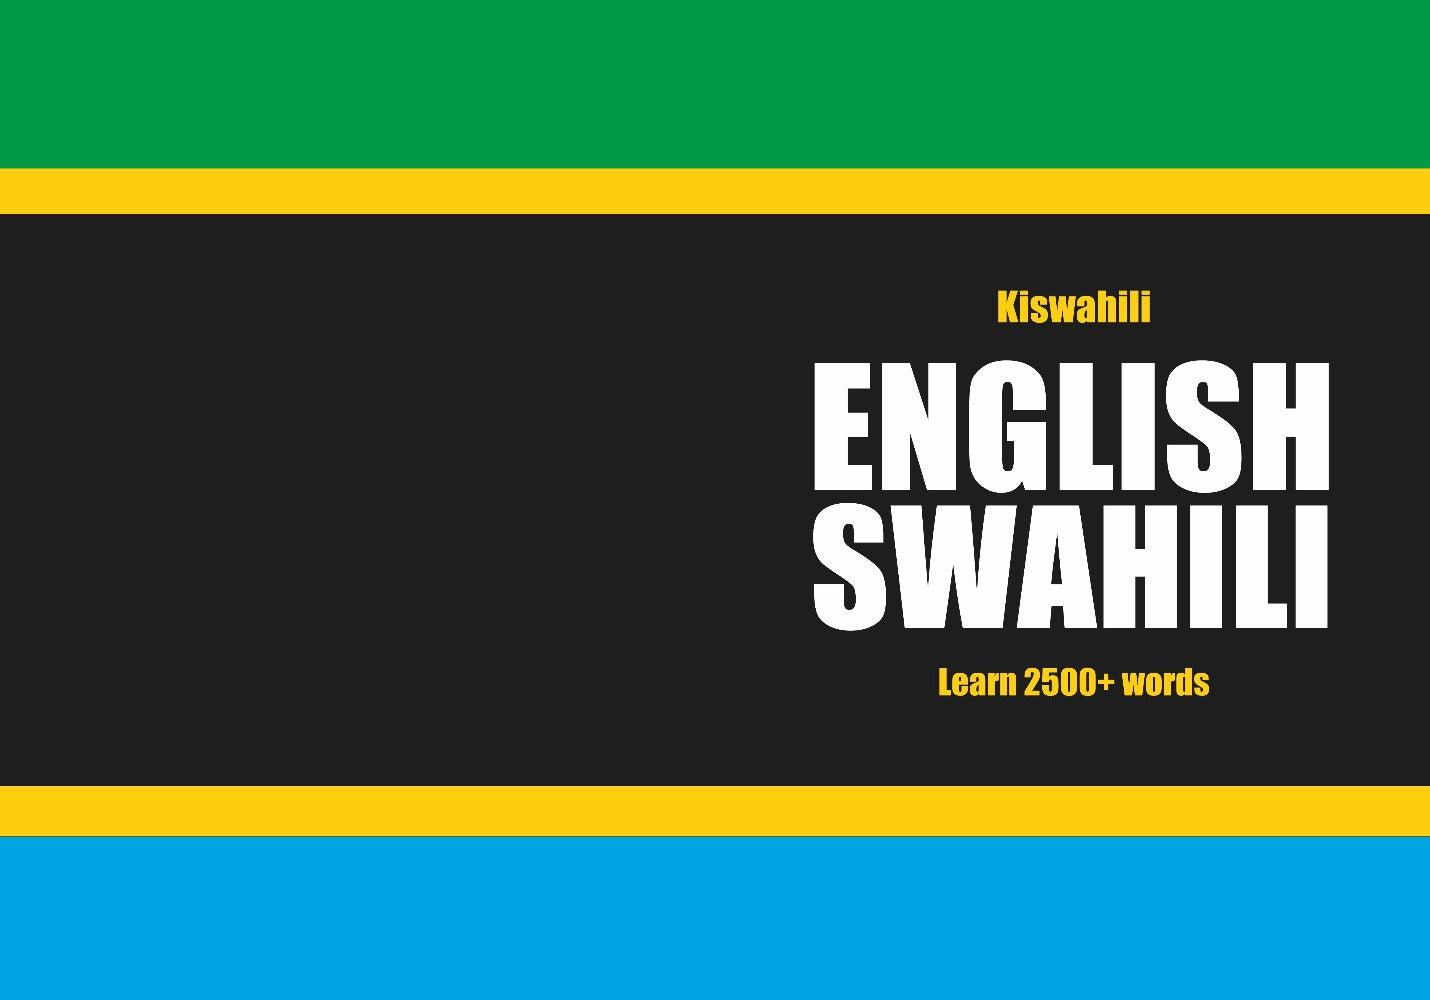 Swahili language learning notebook cover